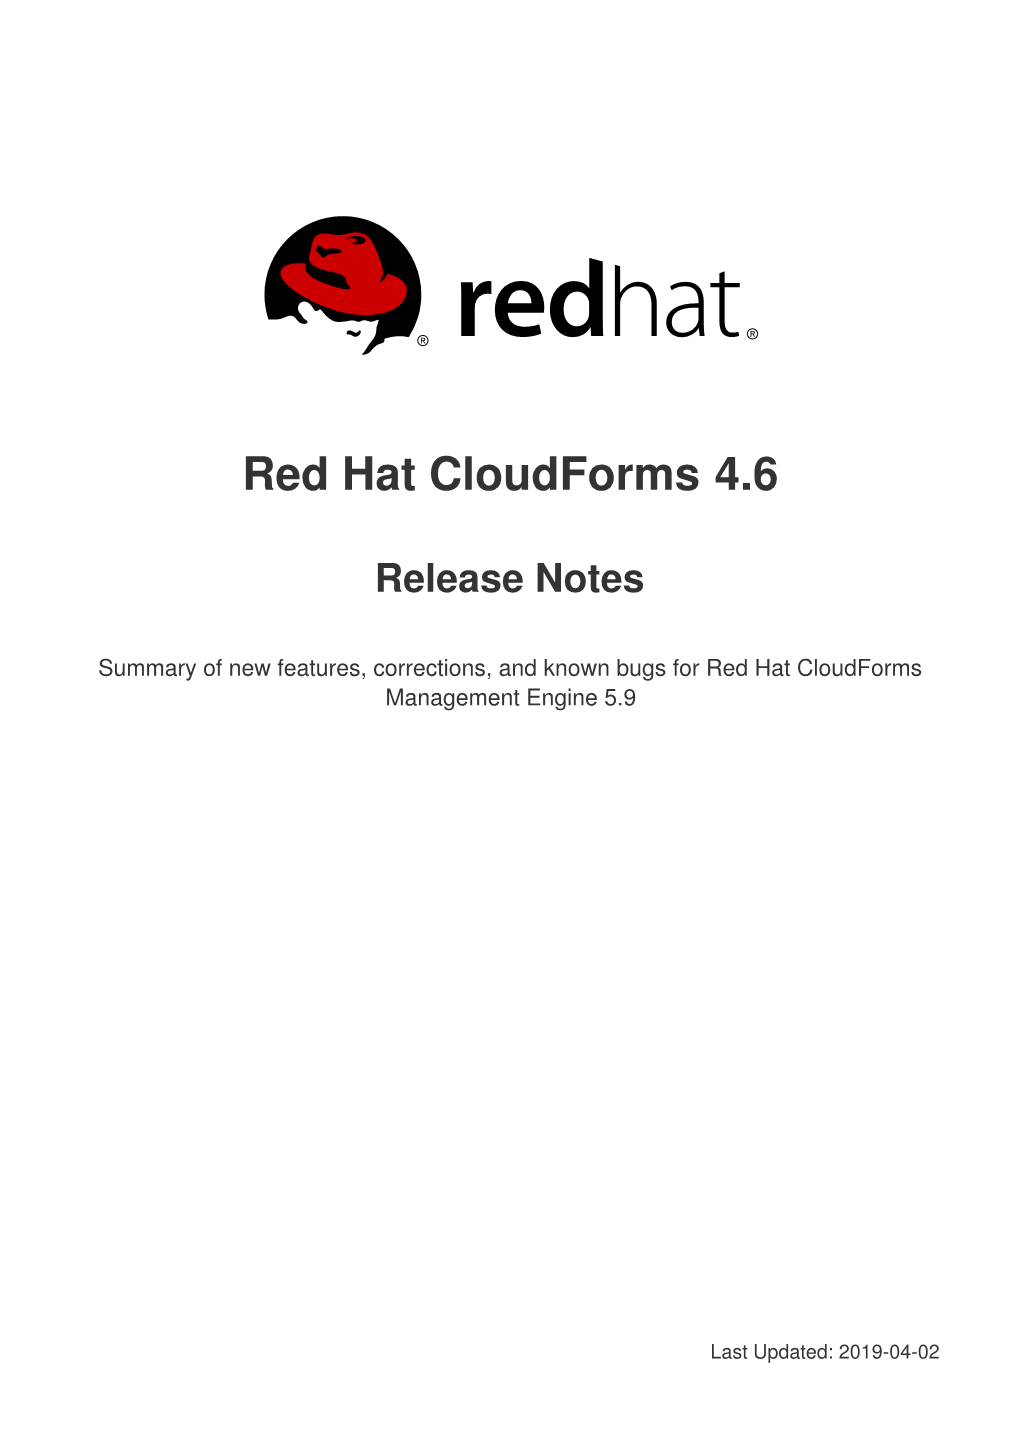 Red Hat Cloudforms 4.6 Release Notes